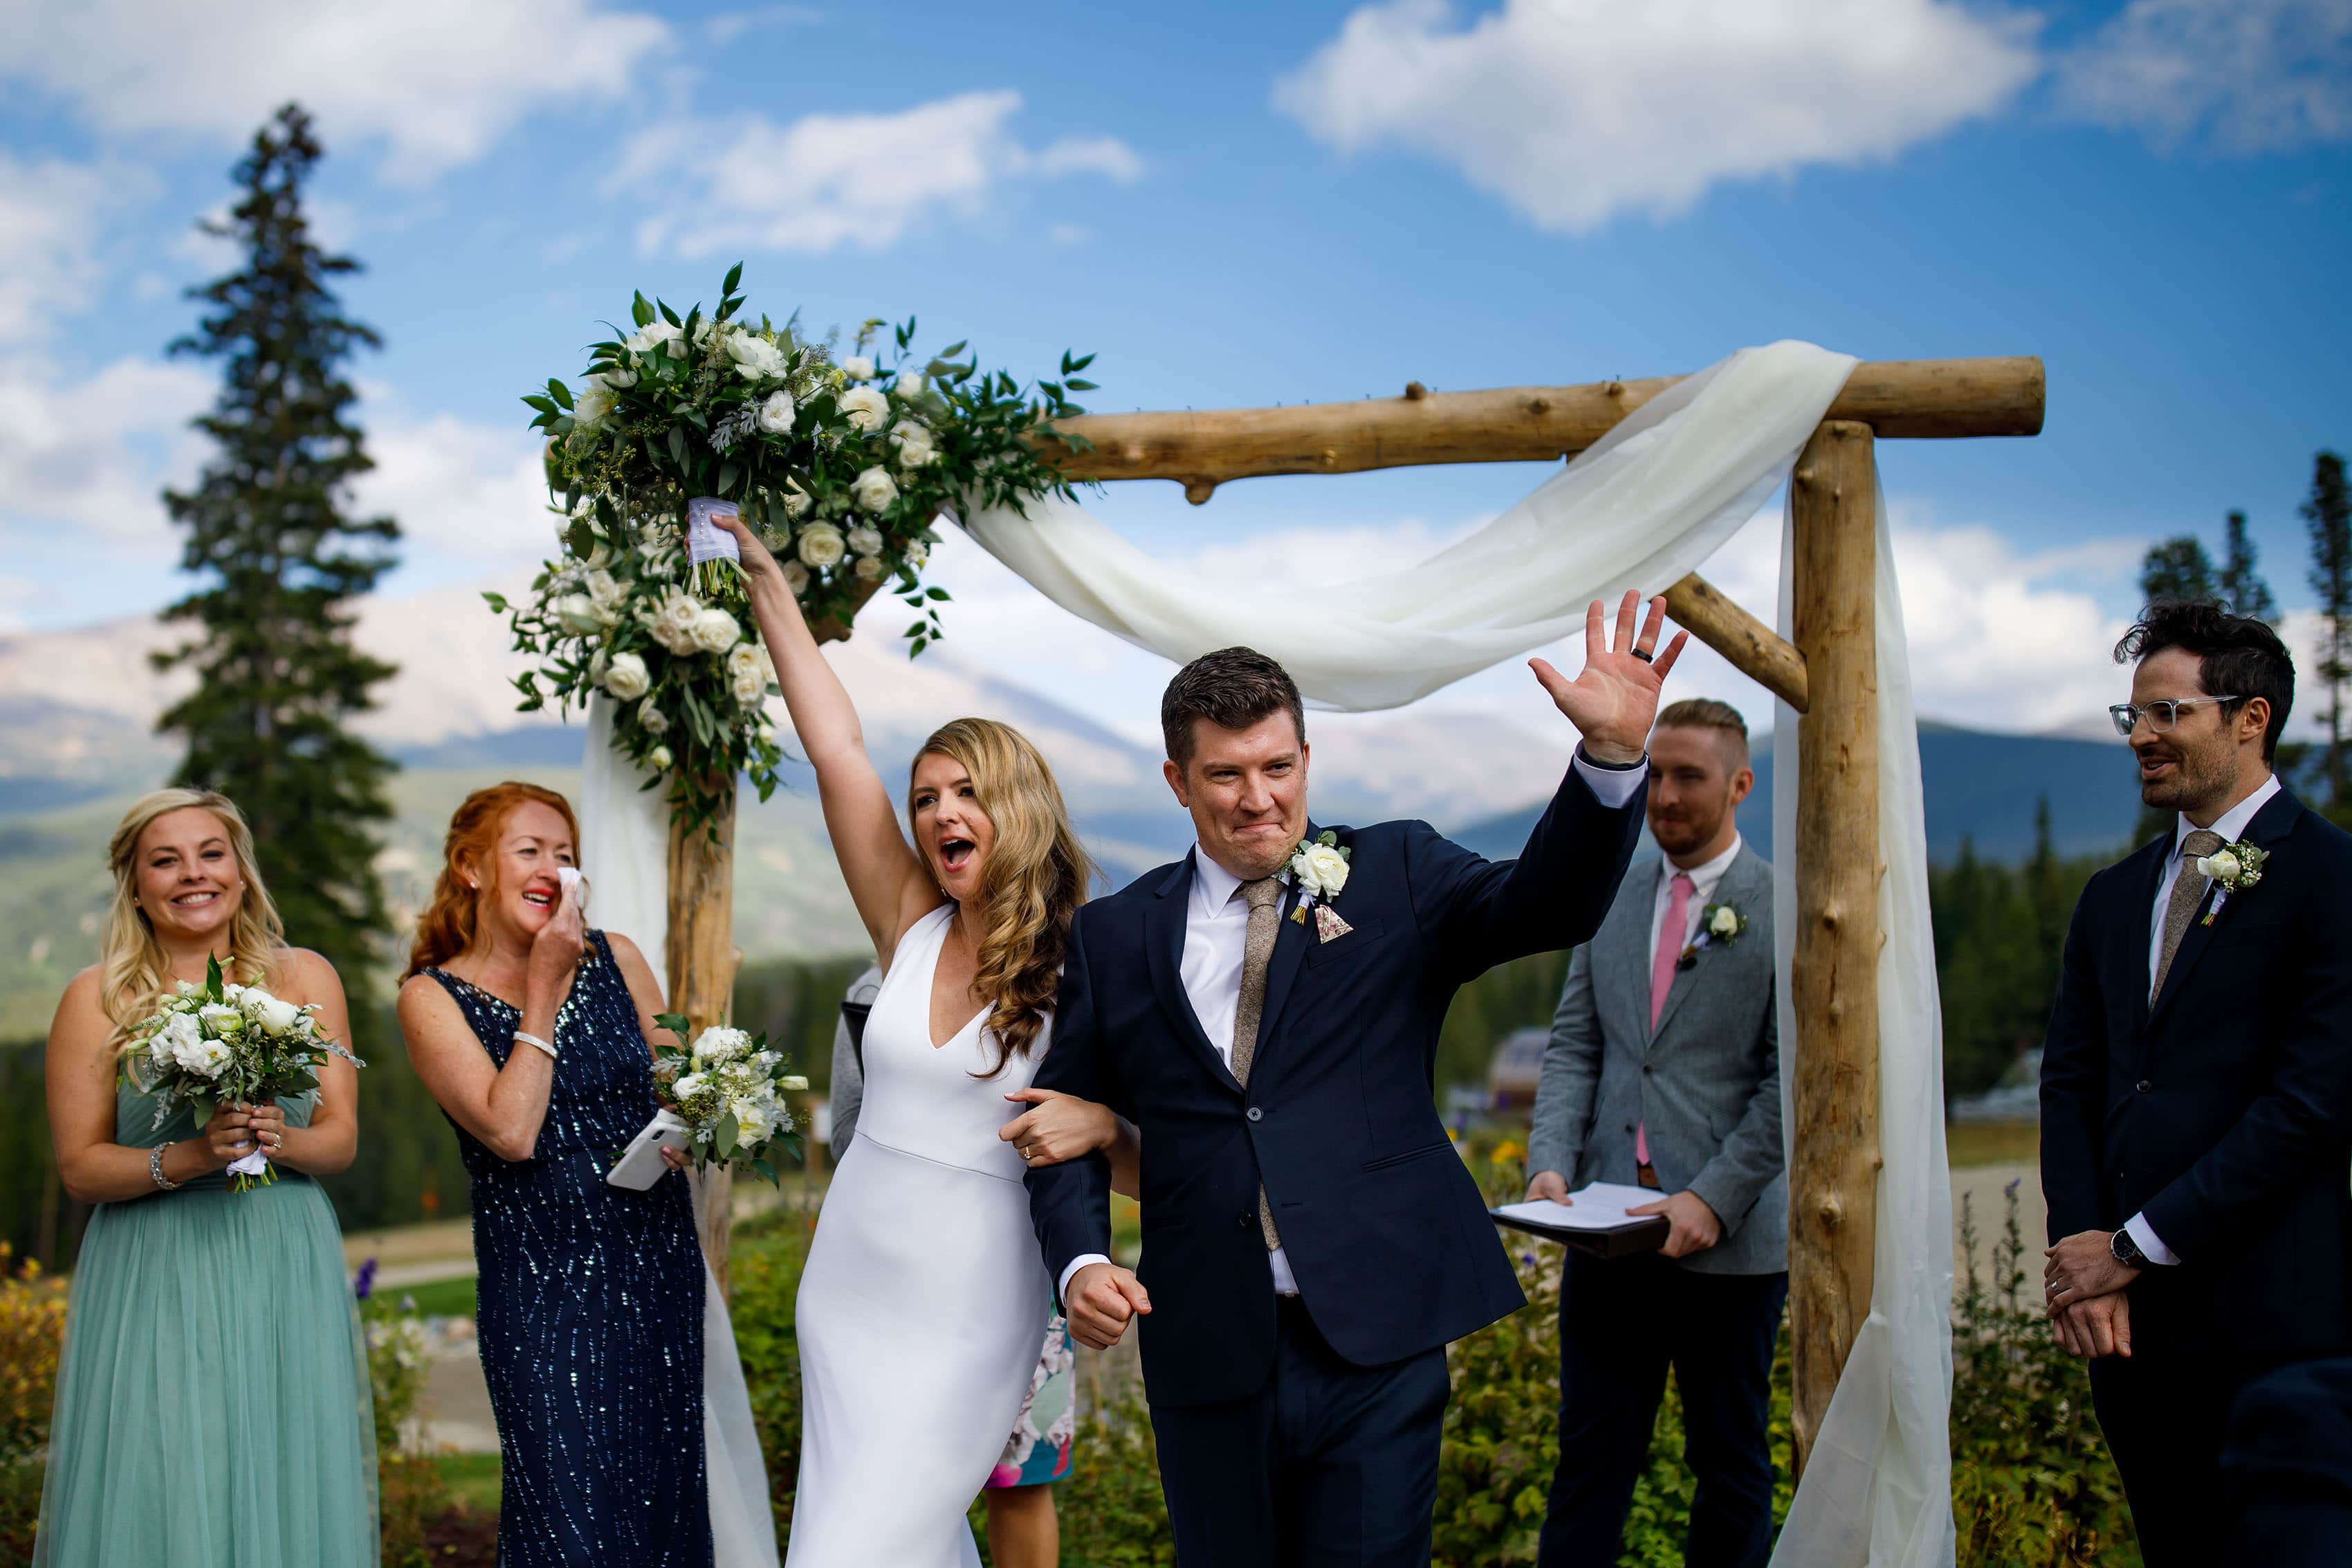 The bride and groom celebrate in front of a wooden arch with flowers at TenMile